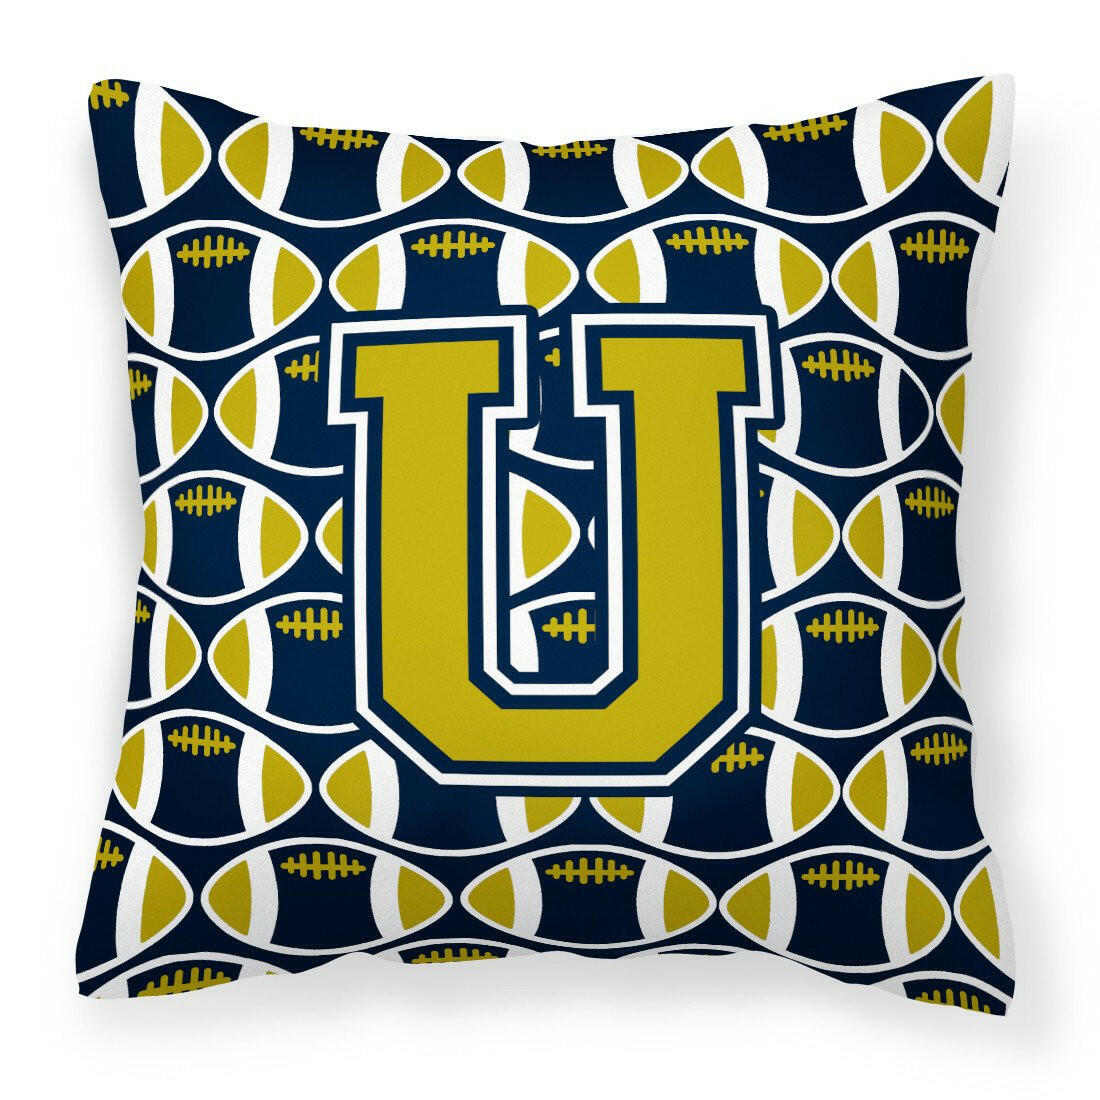 Letter U Football Blue and Gold Fabric Decorative Pillow CJ1074-UPW1414 by Caroline's Treasures